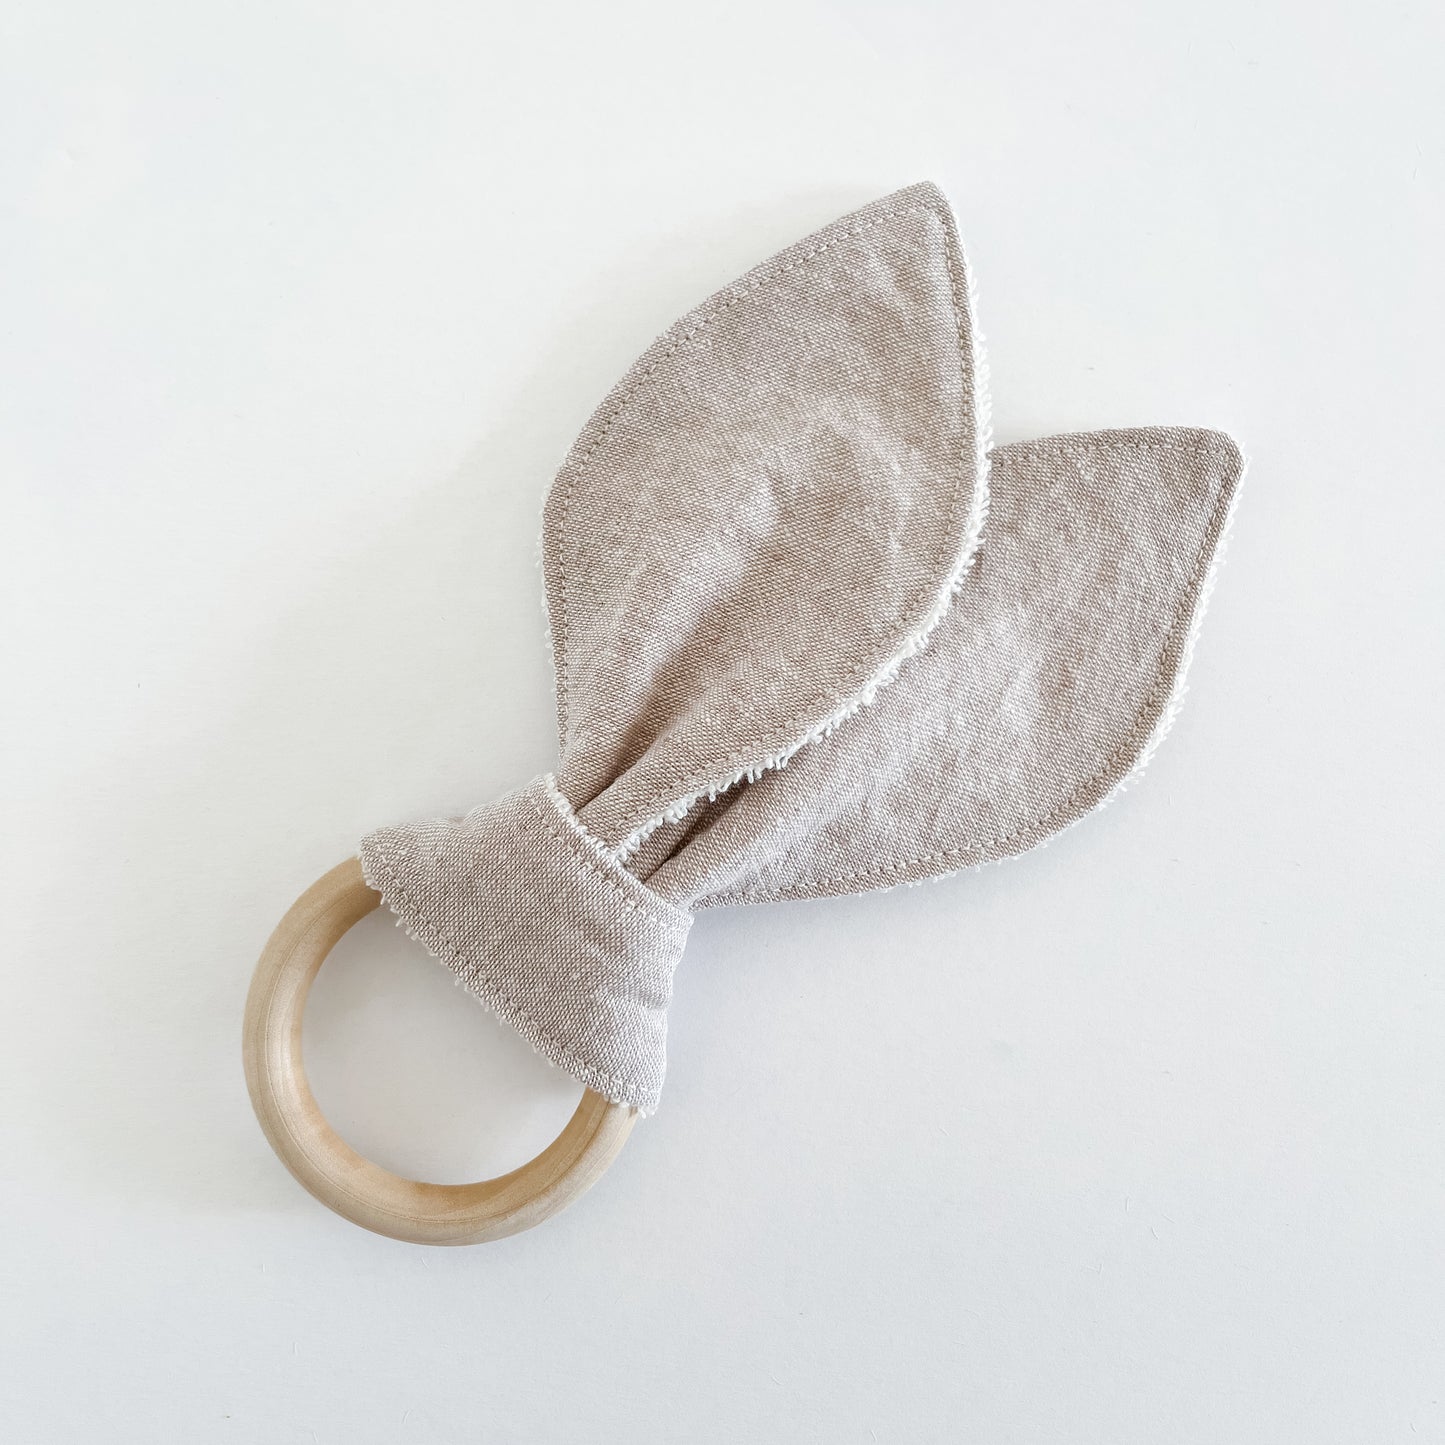 Bunny Ear Teether Toy // Natural Linen